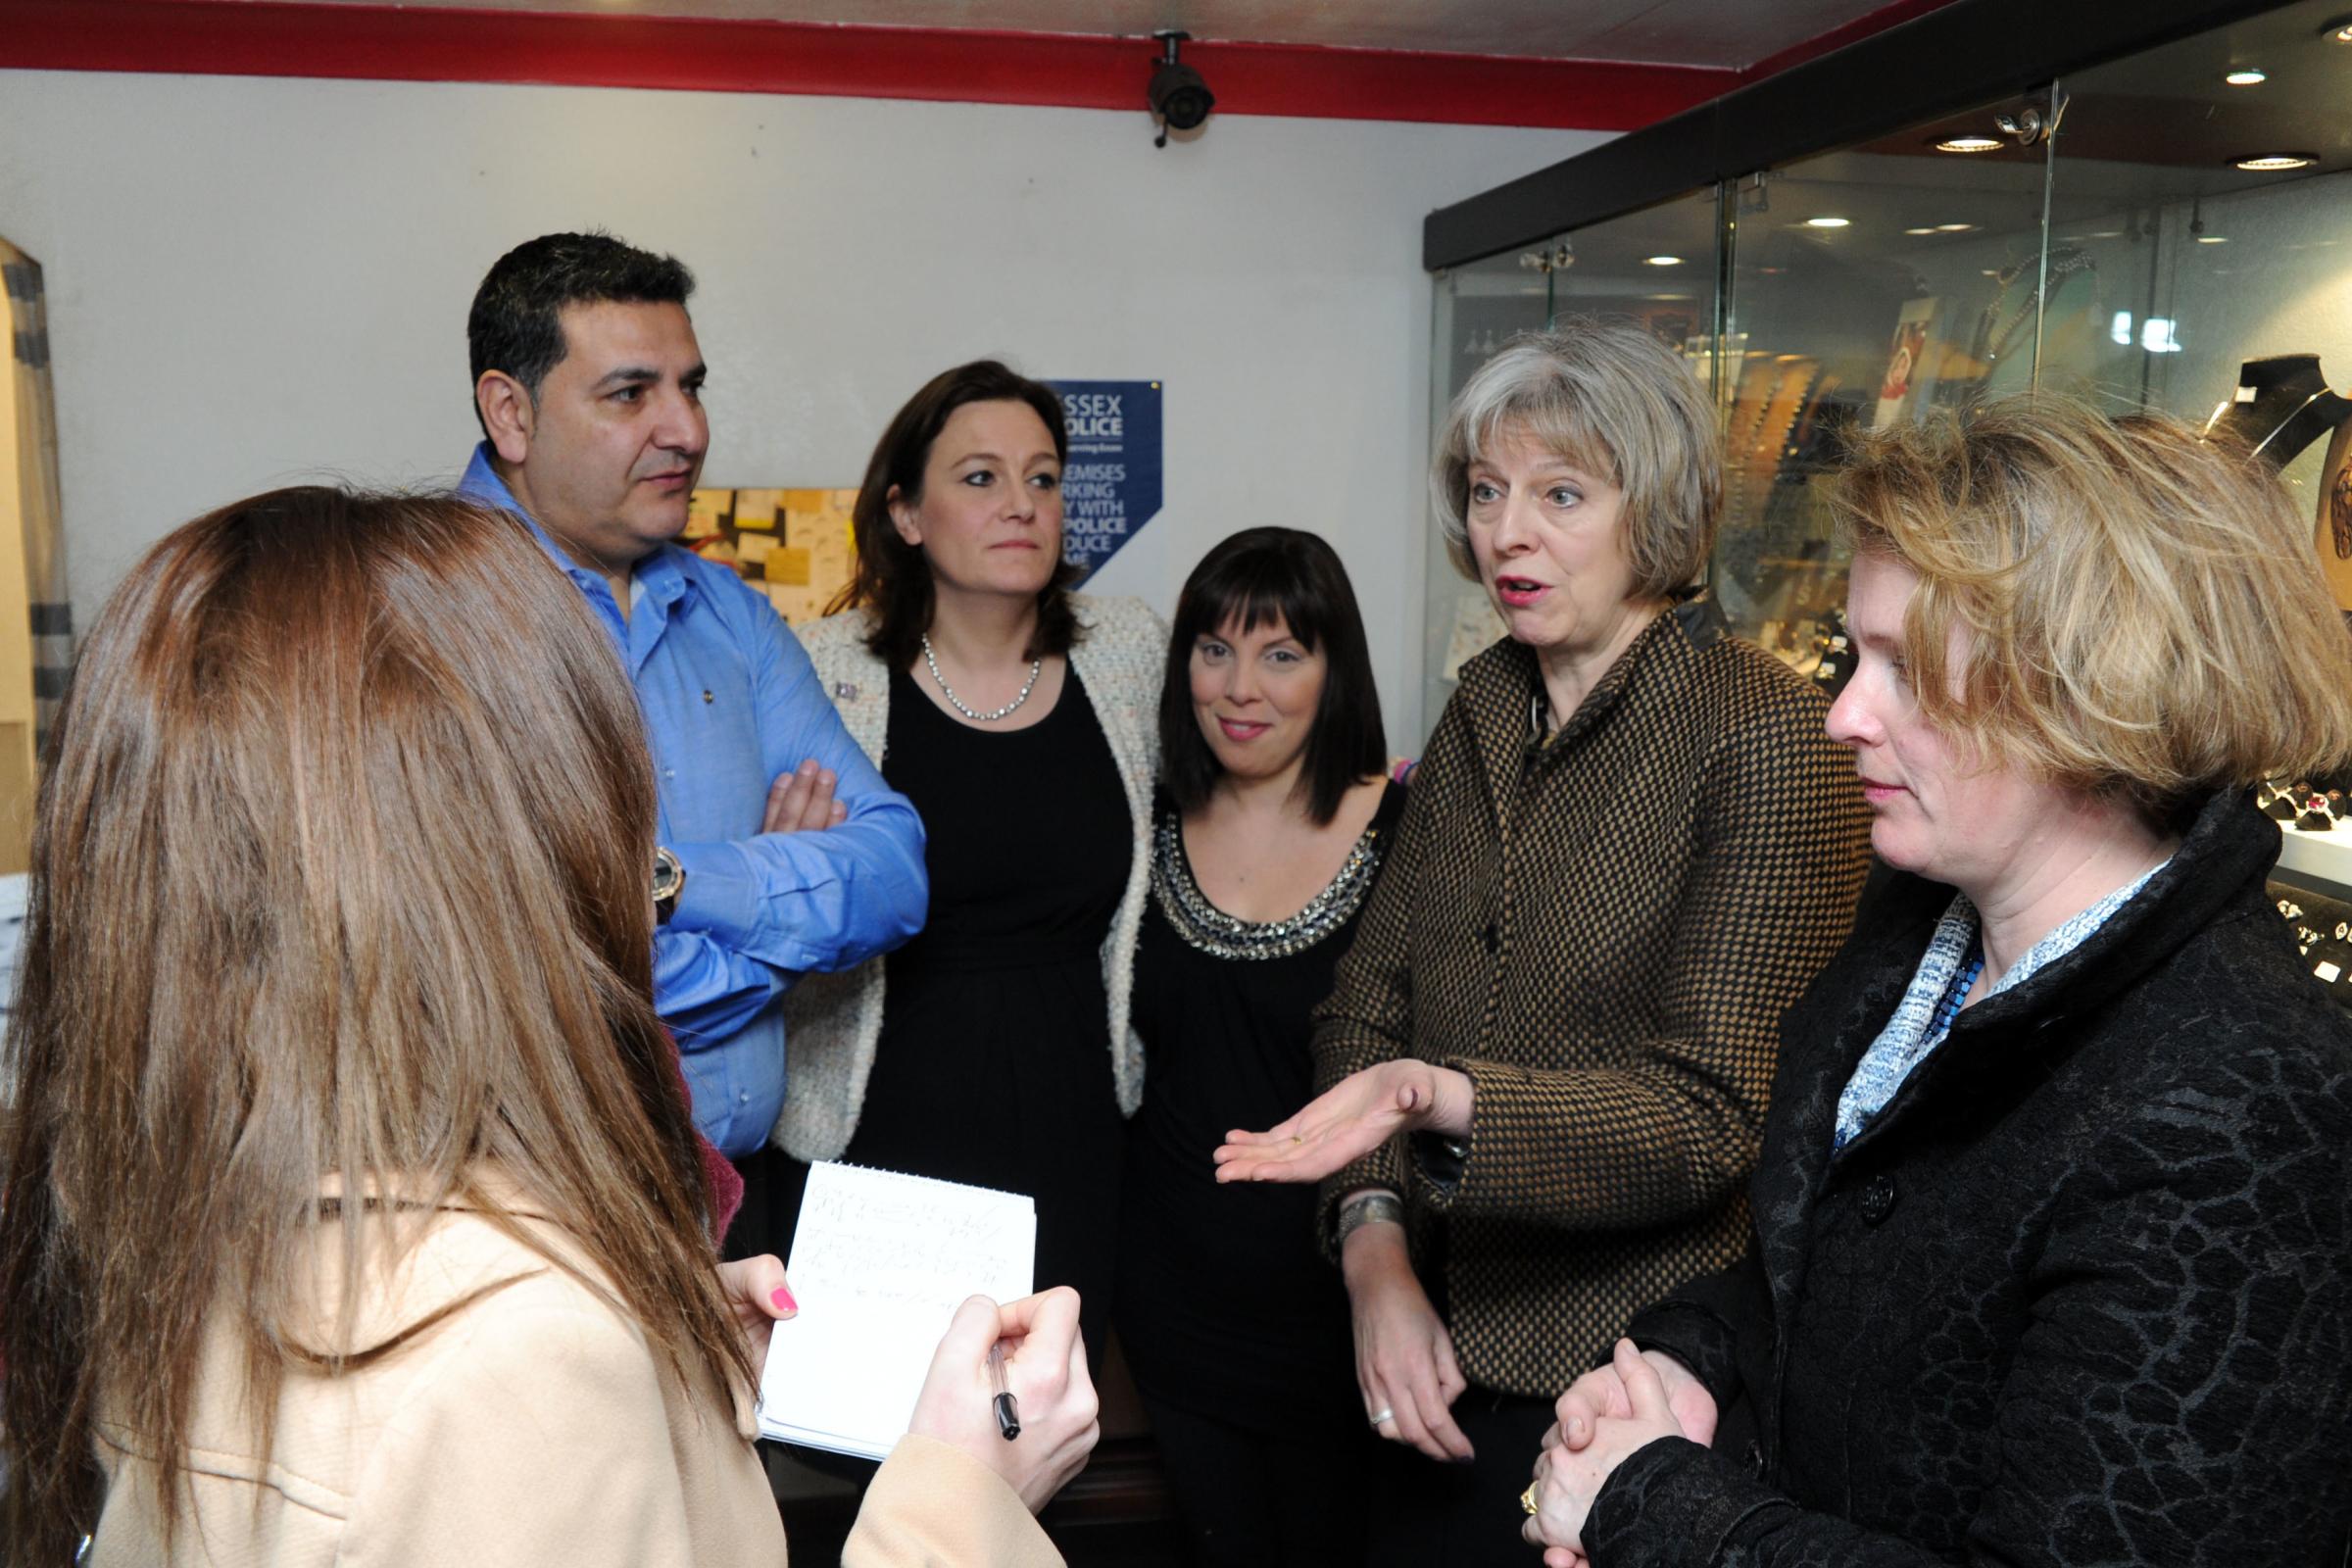 Having her say - Theresa May, who went on to become Prime Minister, visited Canveys Gold and Diamonds shortly after it was raided in 2015